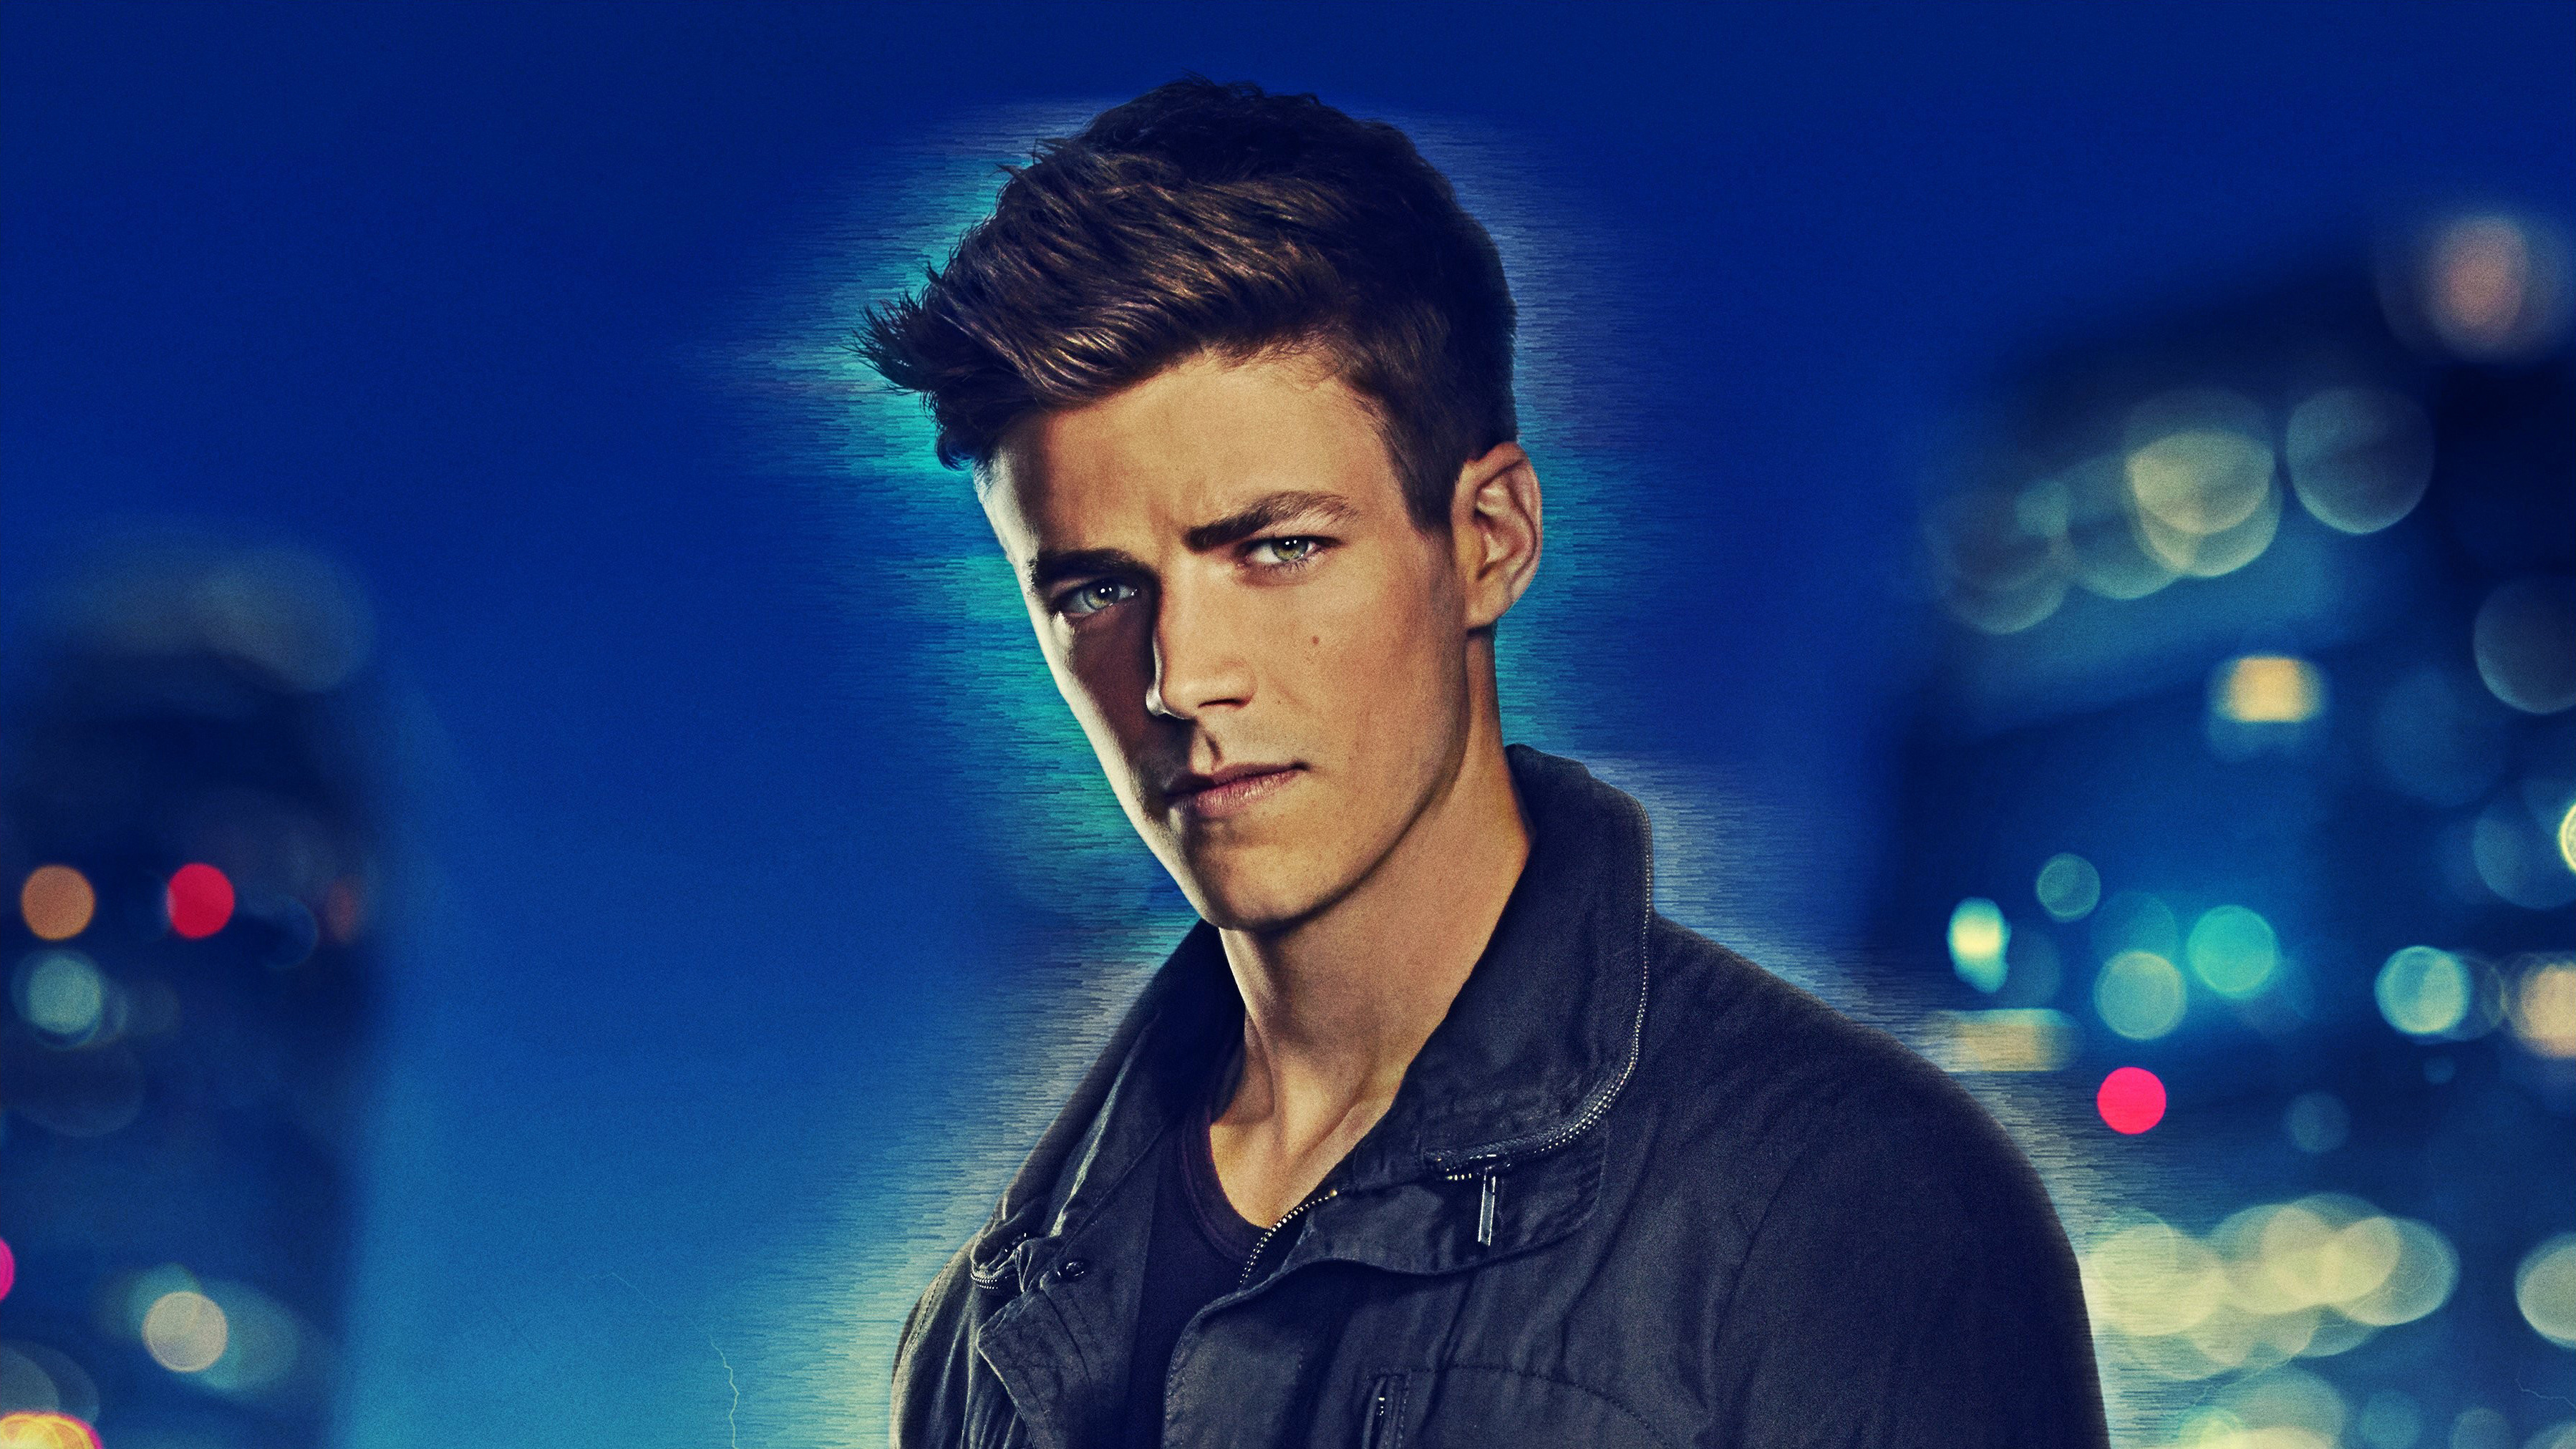 Grant Gustin As Barry Allen In The Flash - Grant Gustin , HD Wallpaper & Backgrounds